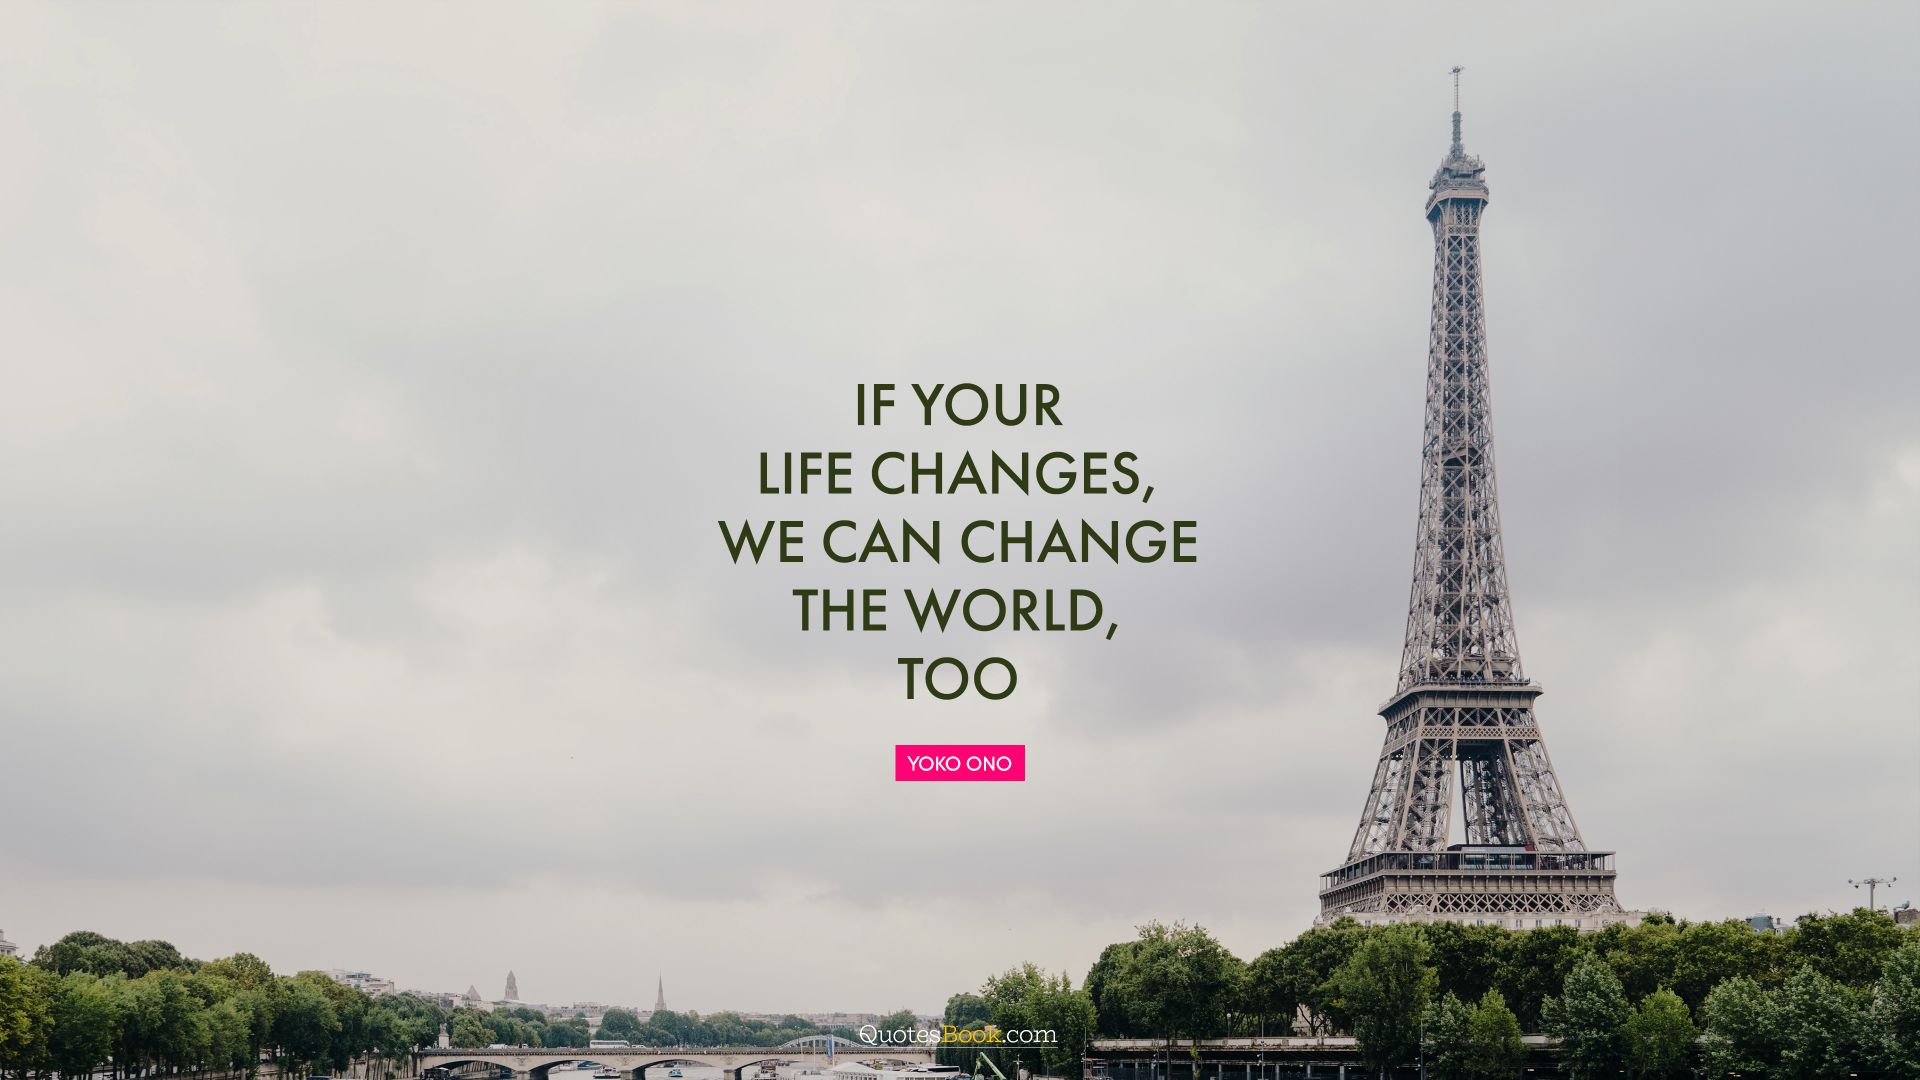 If your life changes, we can change the world, too. - Quote by Yoko Ono